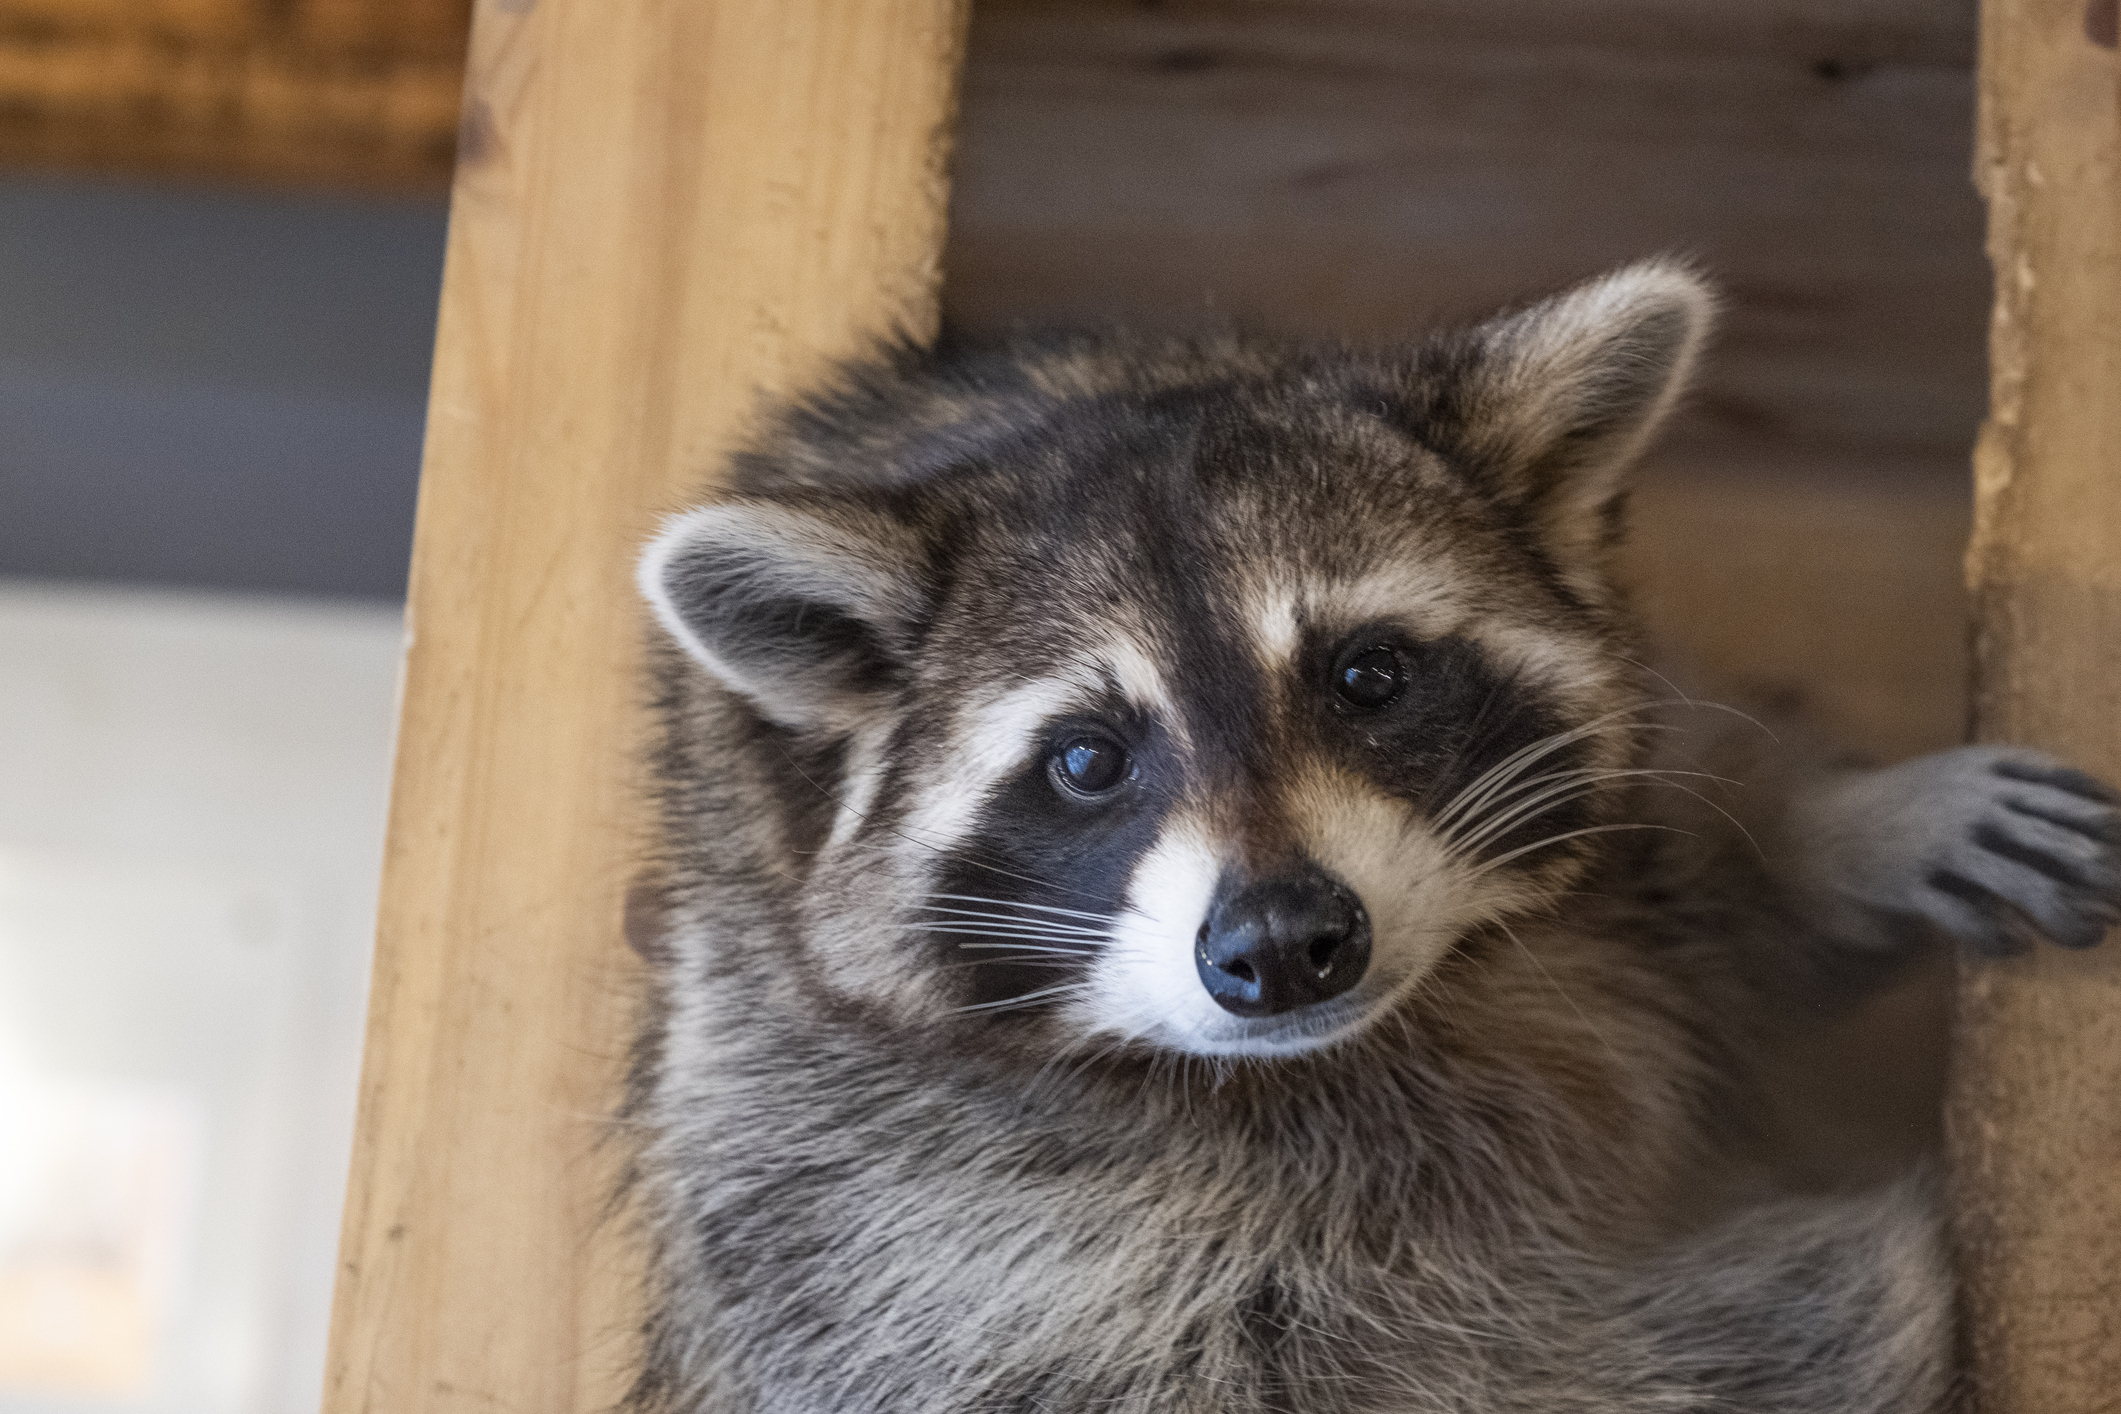 Raccoon peeking from a wooden ledge with a curious expression